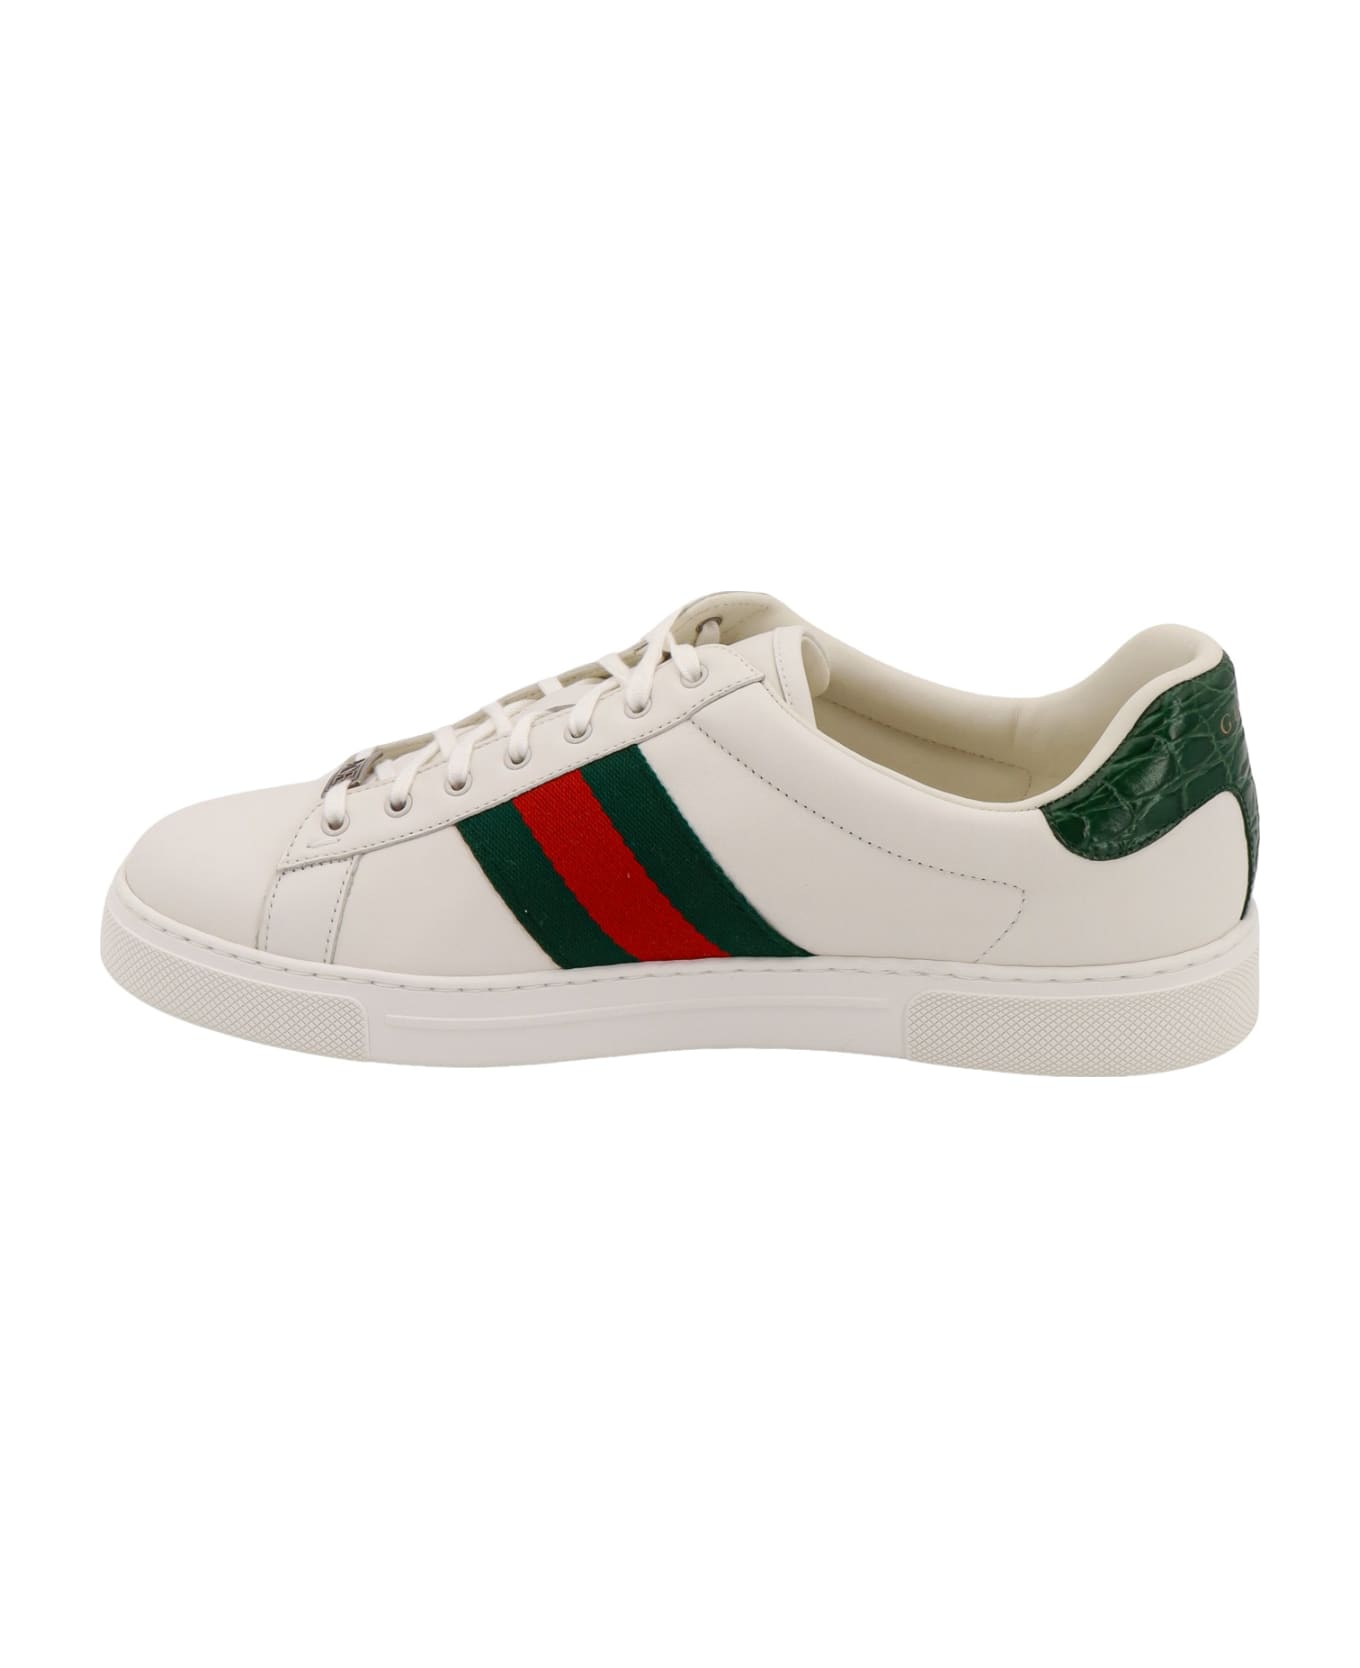 Gucci Ace Sneakers - White